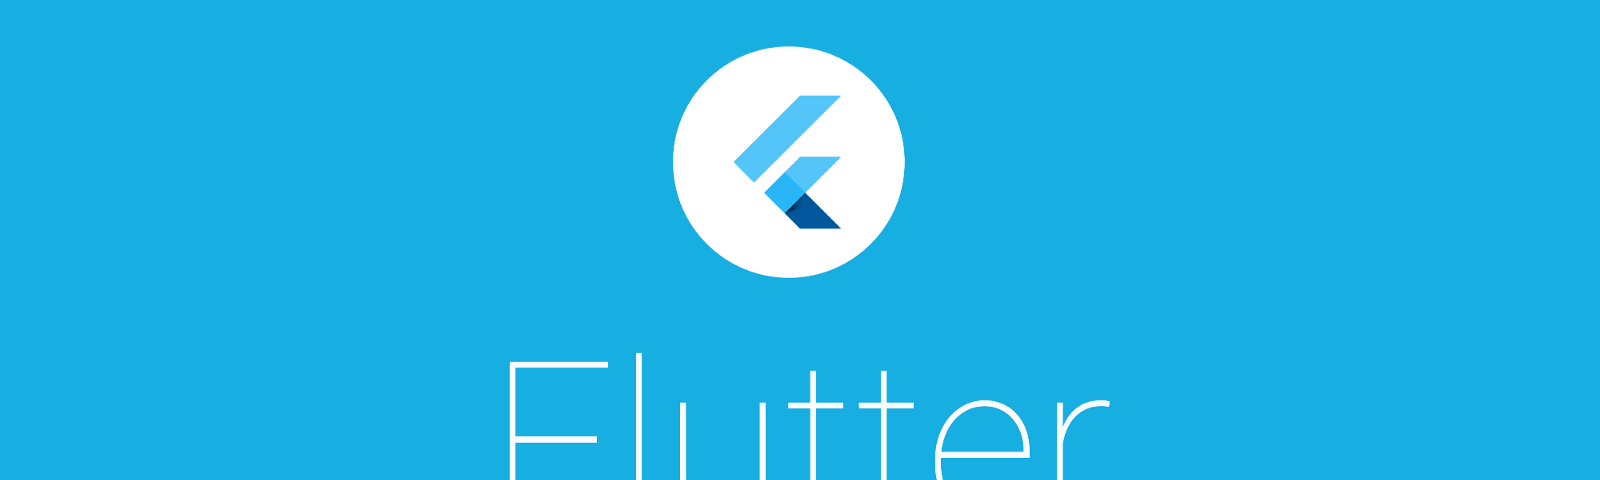 A picture displaying the Flutter logo, with text that says “Flutter”